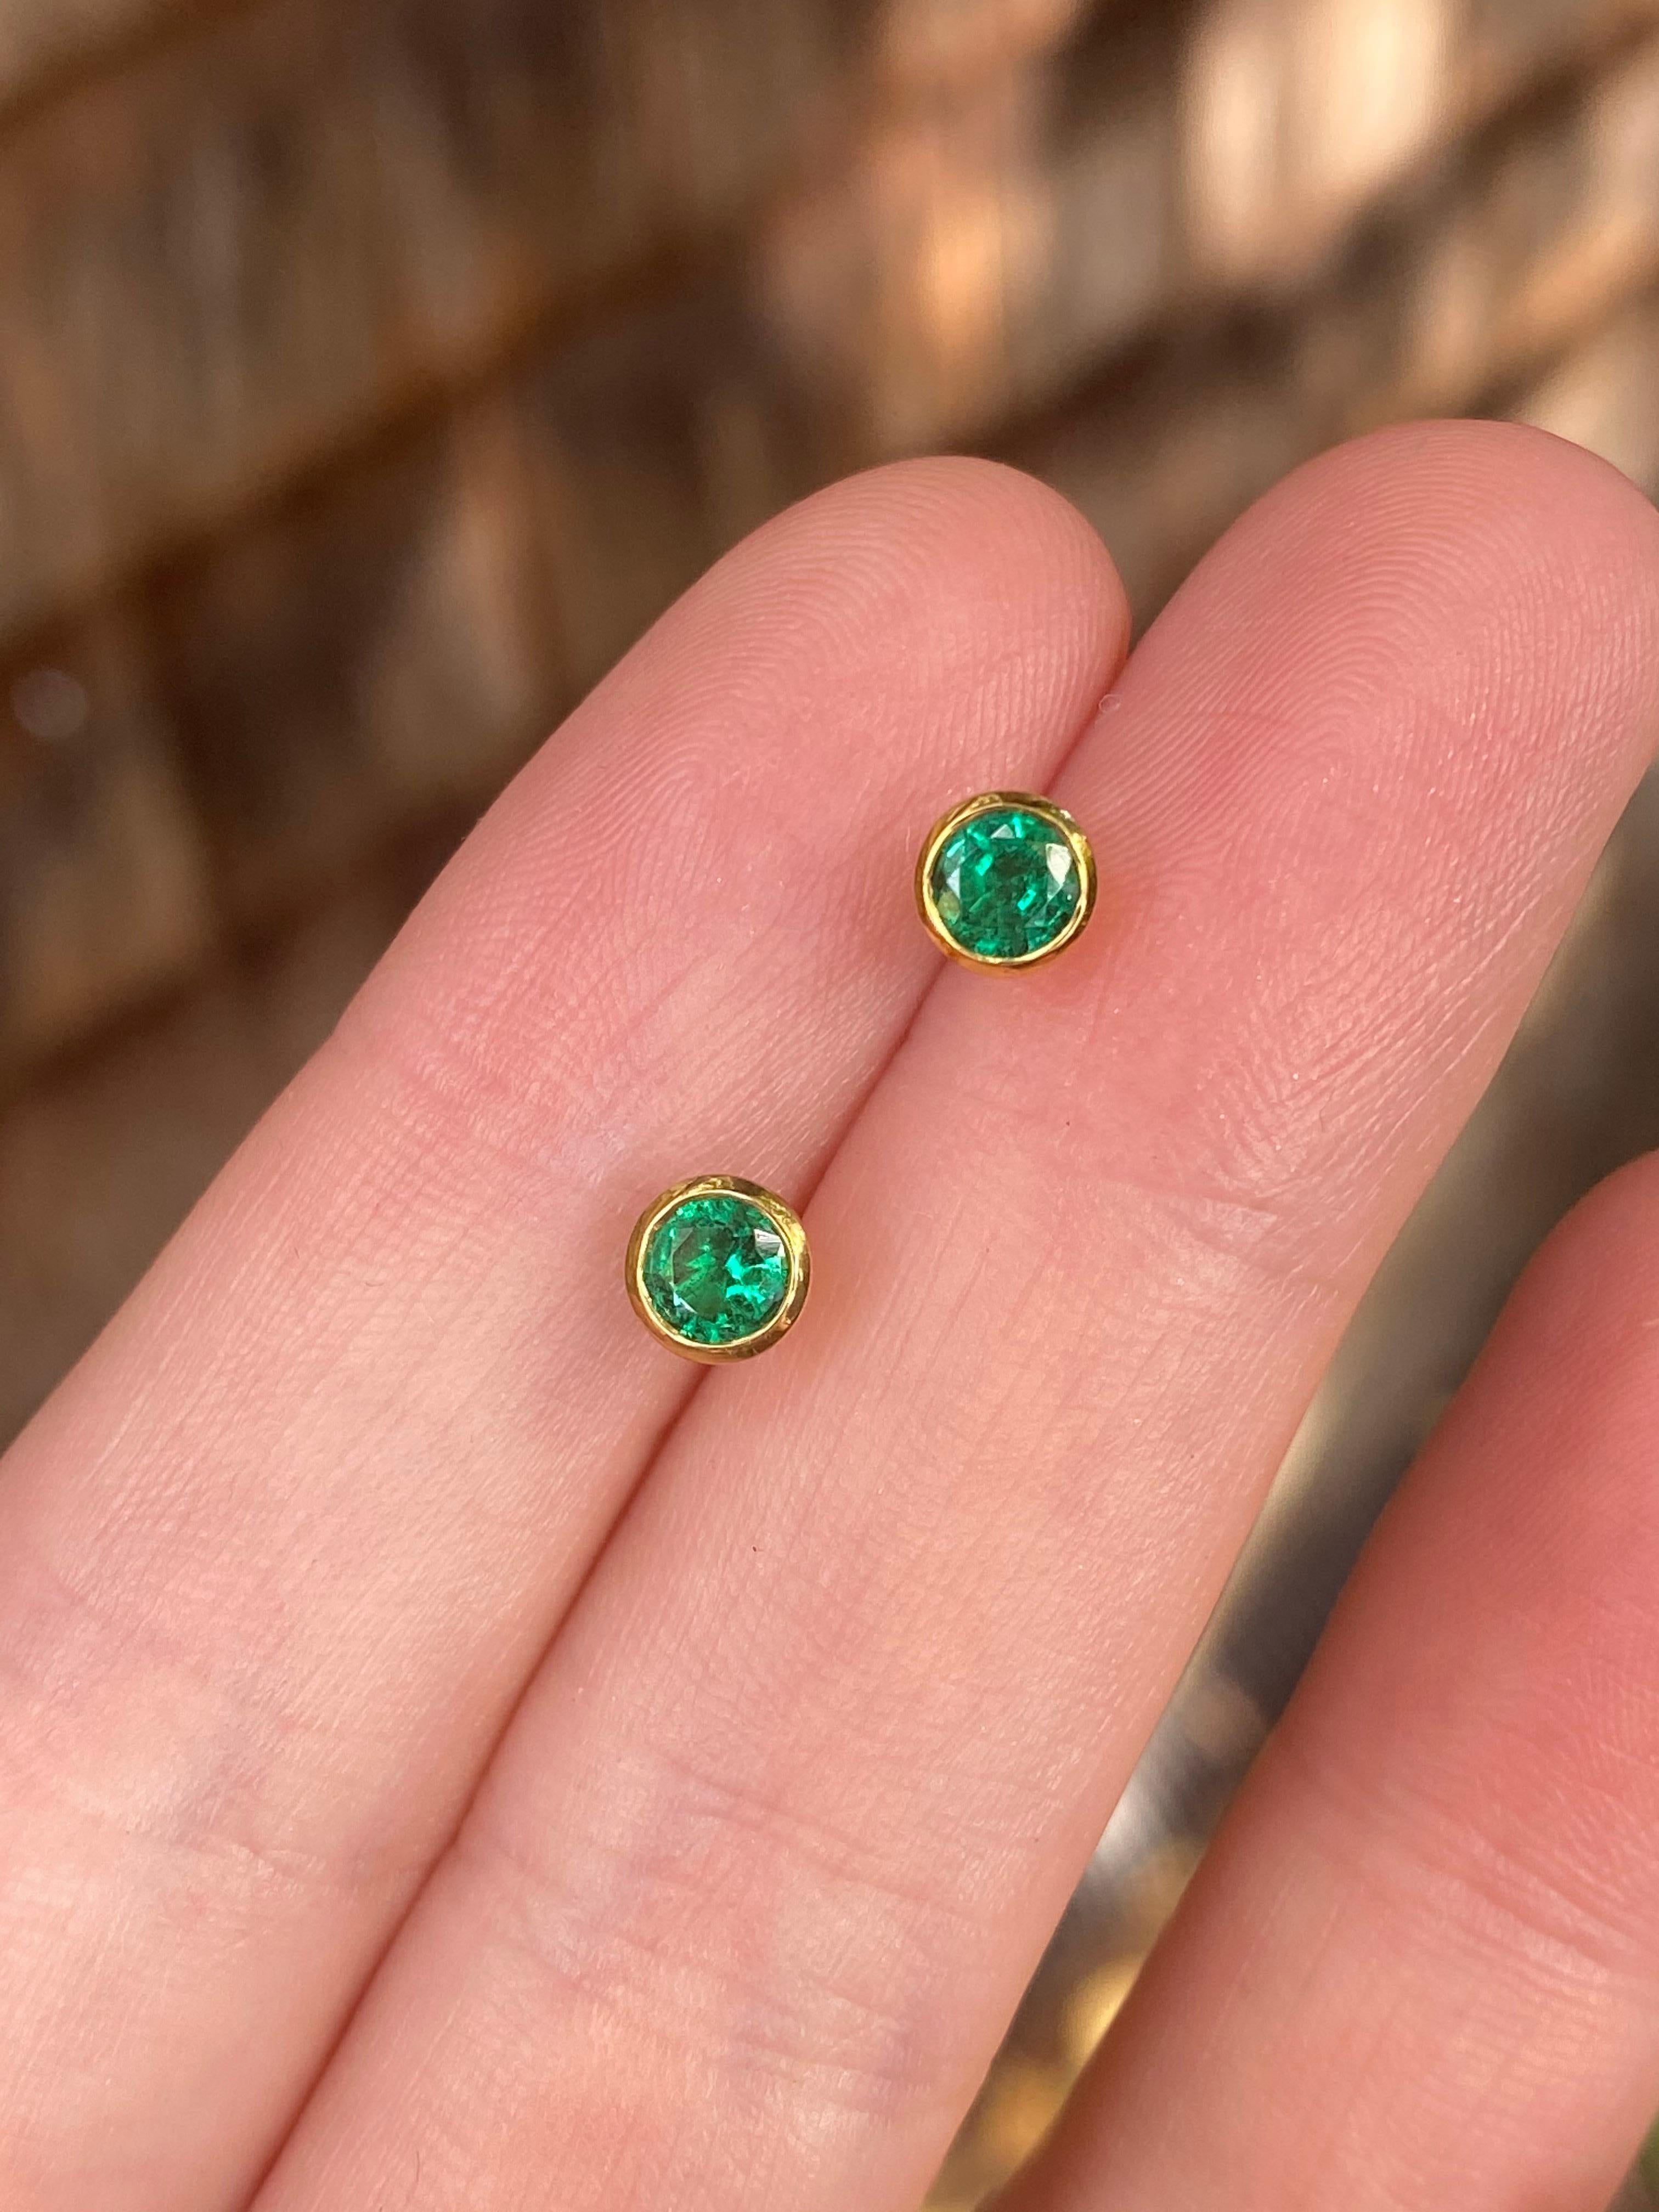 Colombian Emerald Round Stud Earrings Handmade 22 Karat Gold In New Condition For Sale In Berkeley, CA